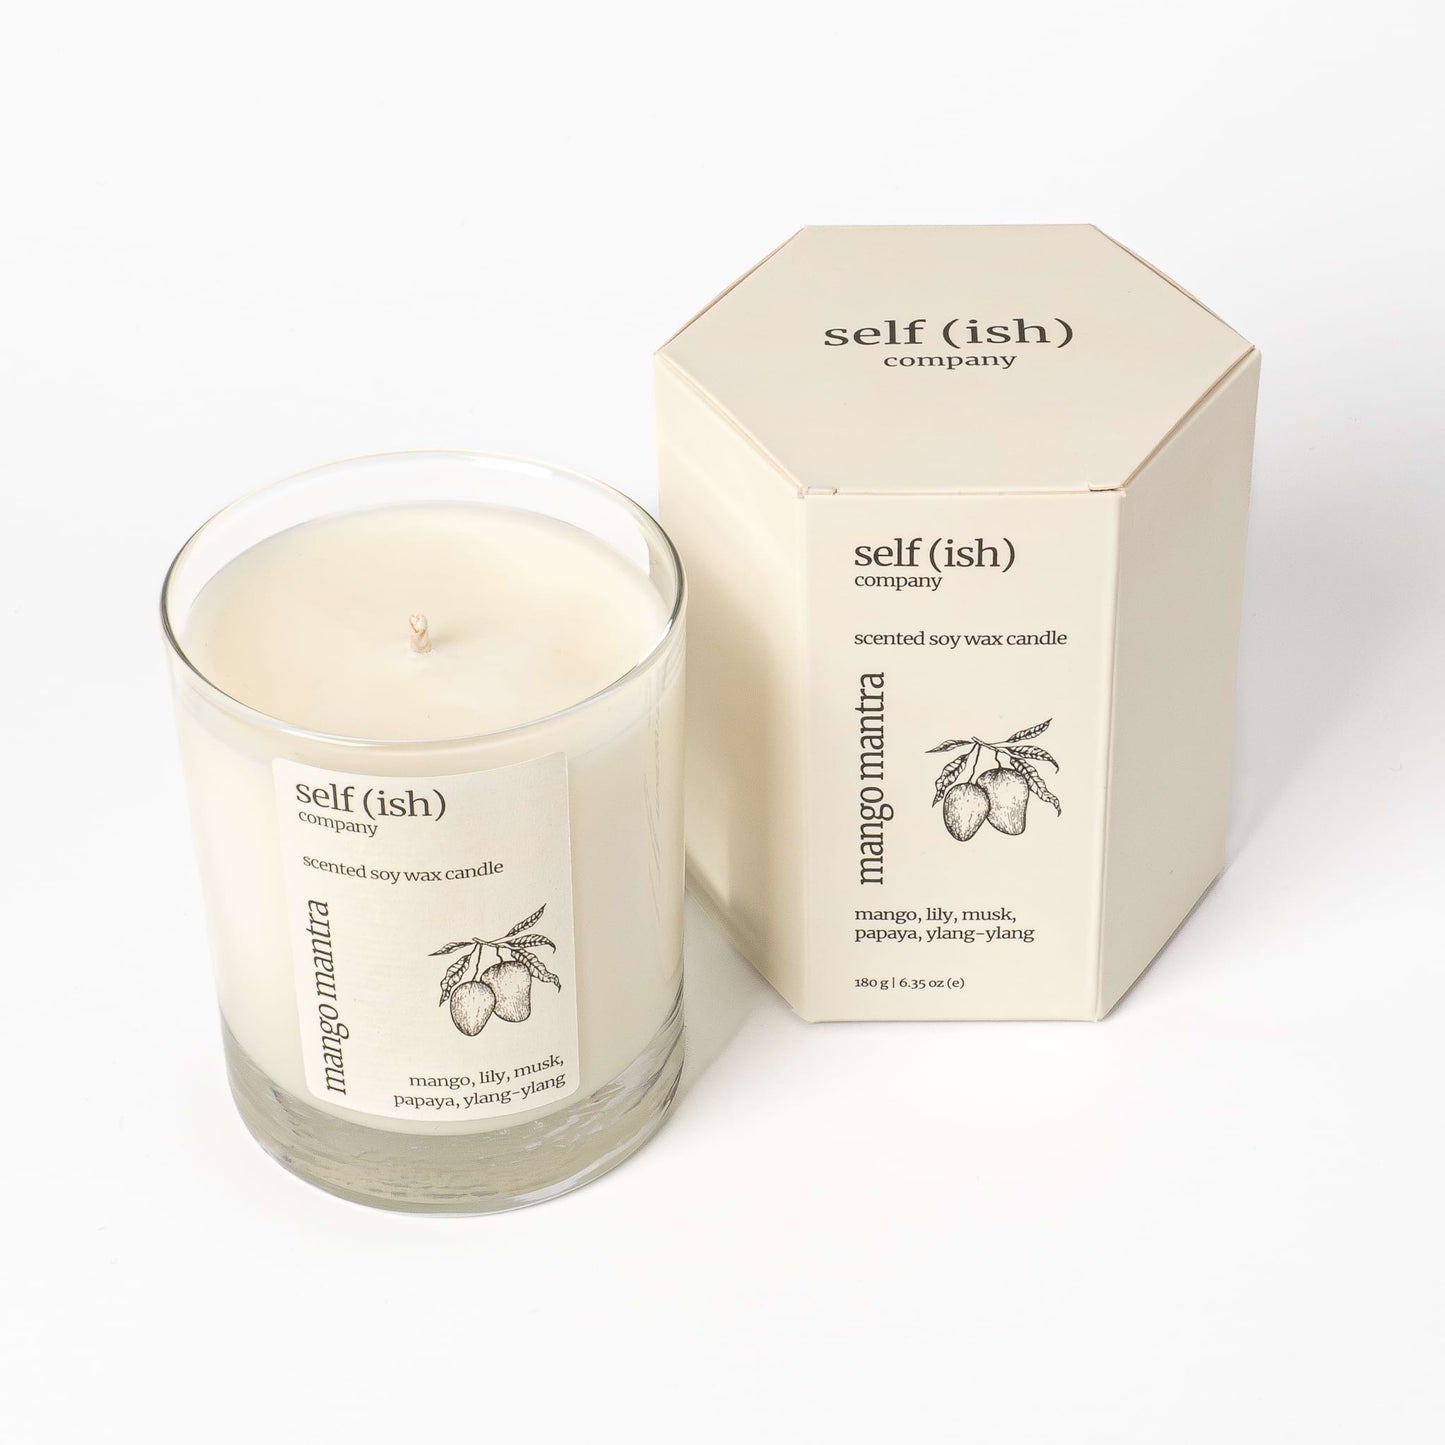 mango soy wax candle with gift packaging for sale in the UK, 100% natural luxury soy candle to buy online from the best candle company in England, paraffin free candle, artisan candle